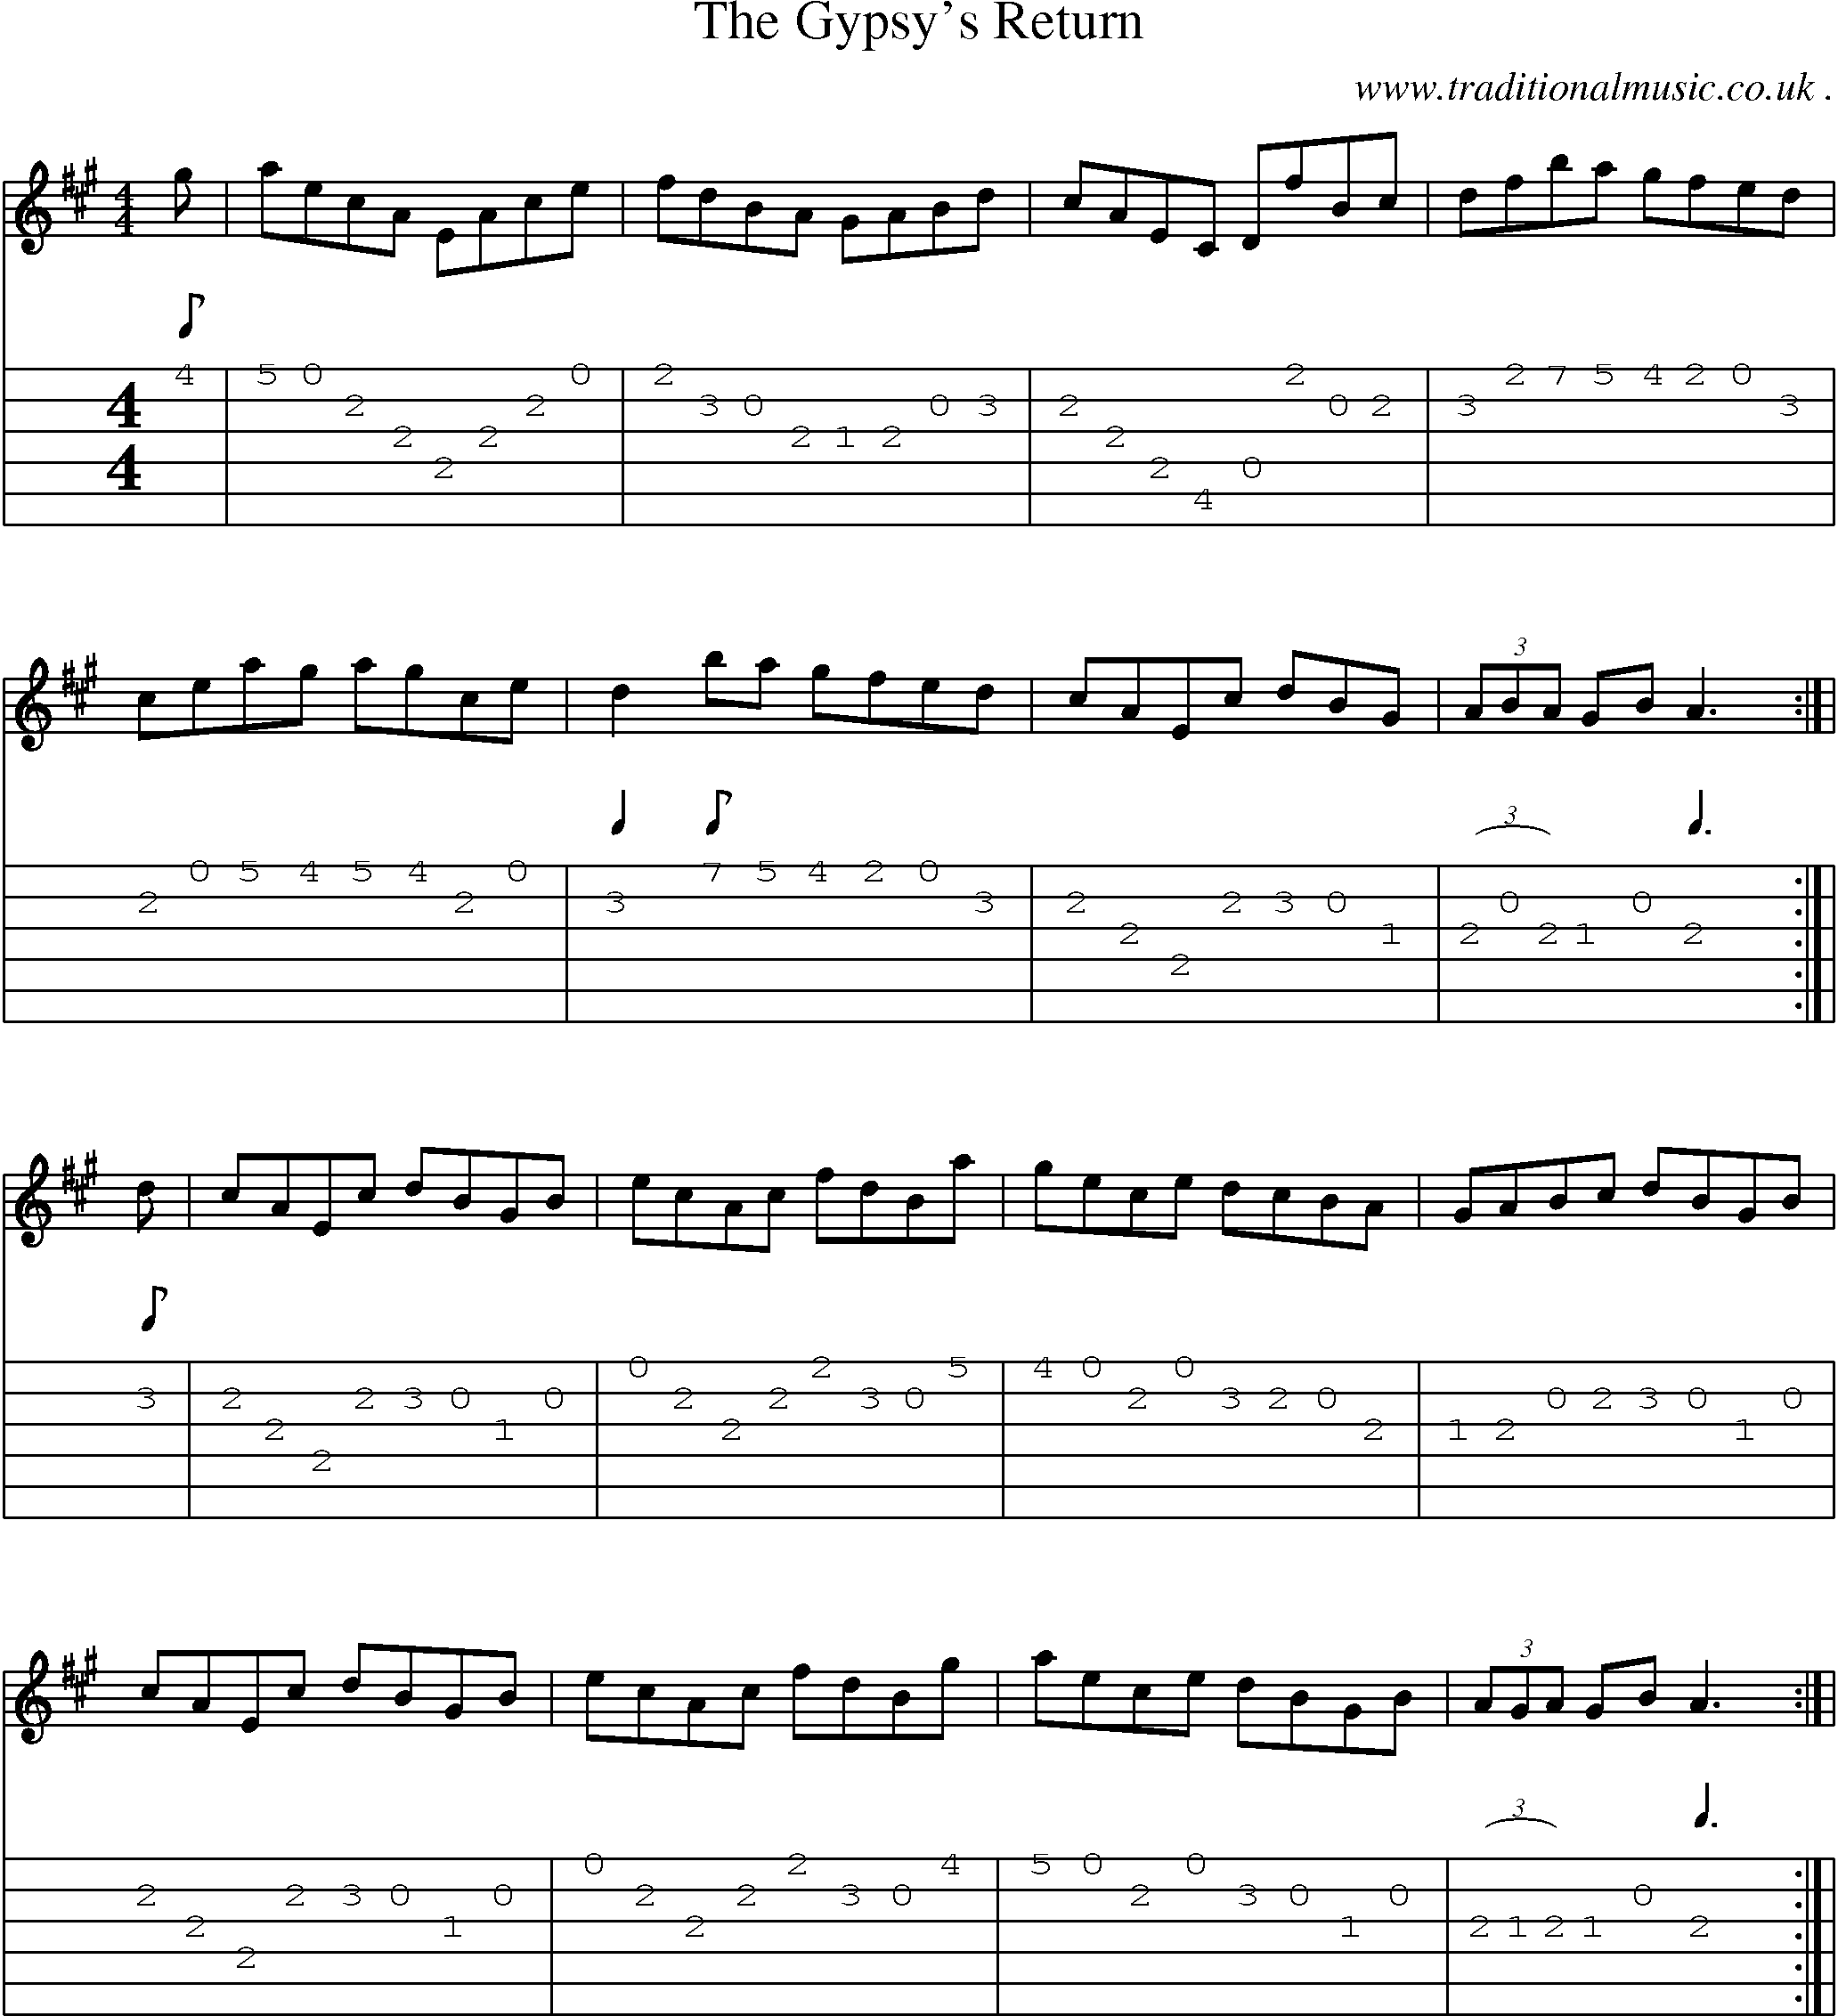 Sheet-Music and Guitar Tabs for The Gypsys Return